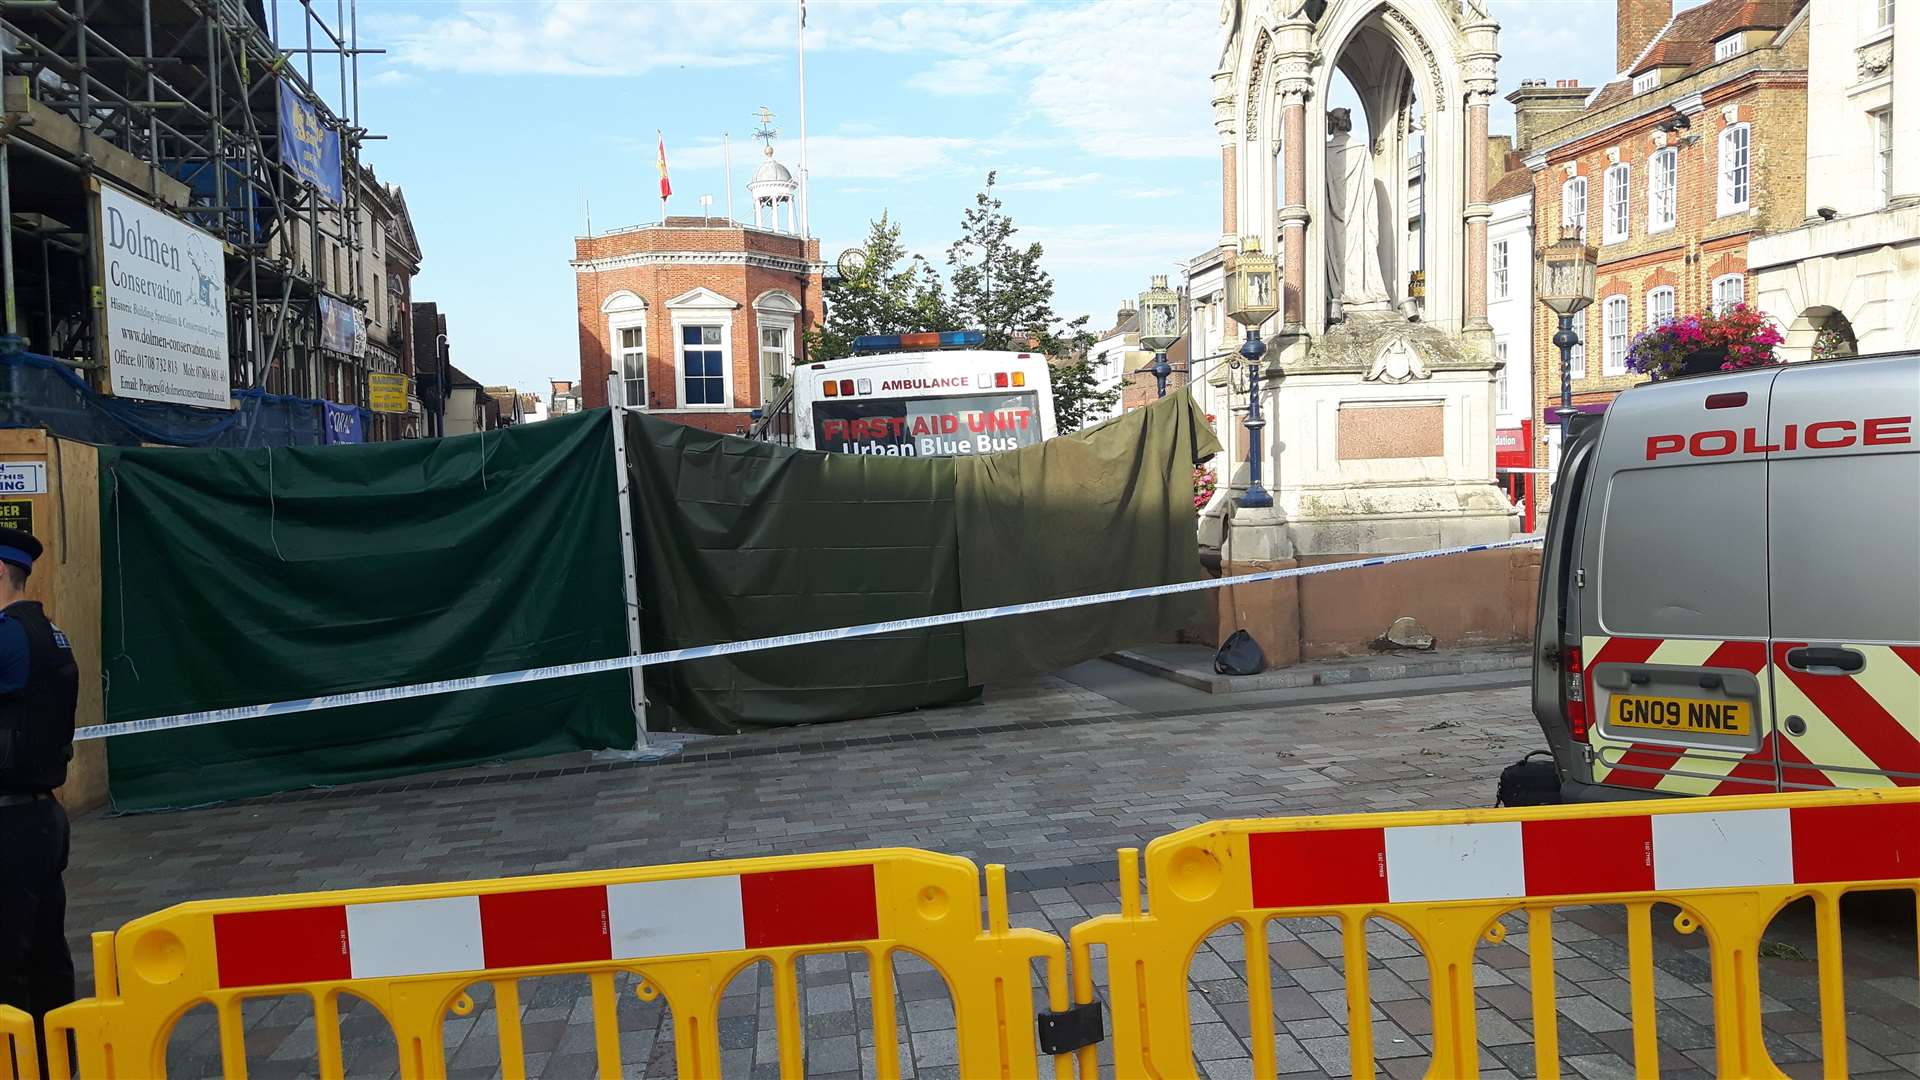 Jubilee Square was cordoned off for Sunday as police launched a murder investigation